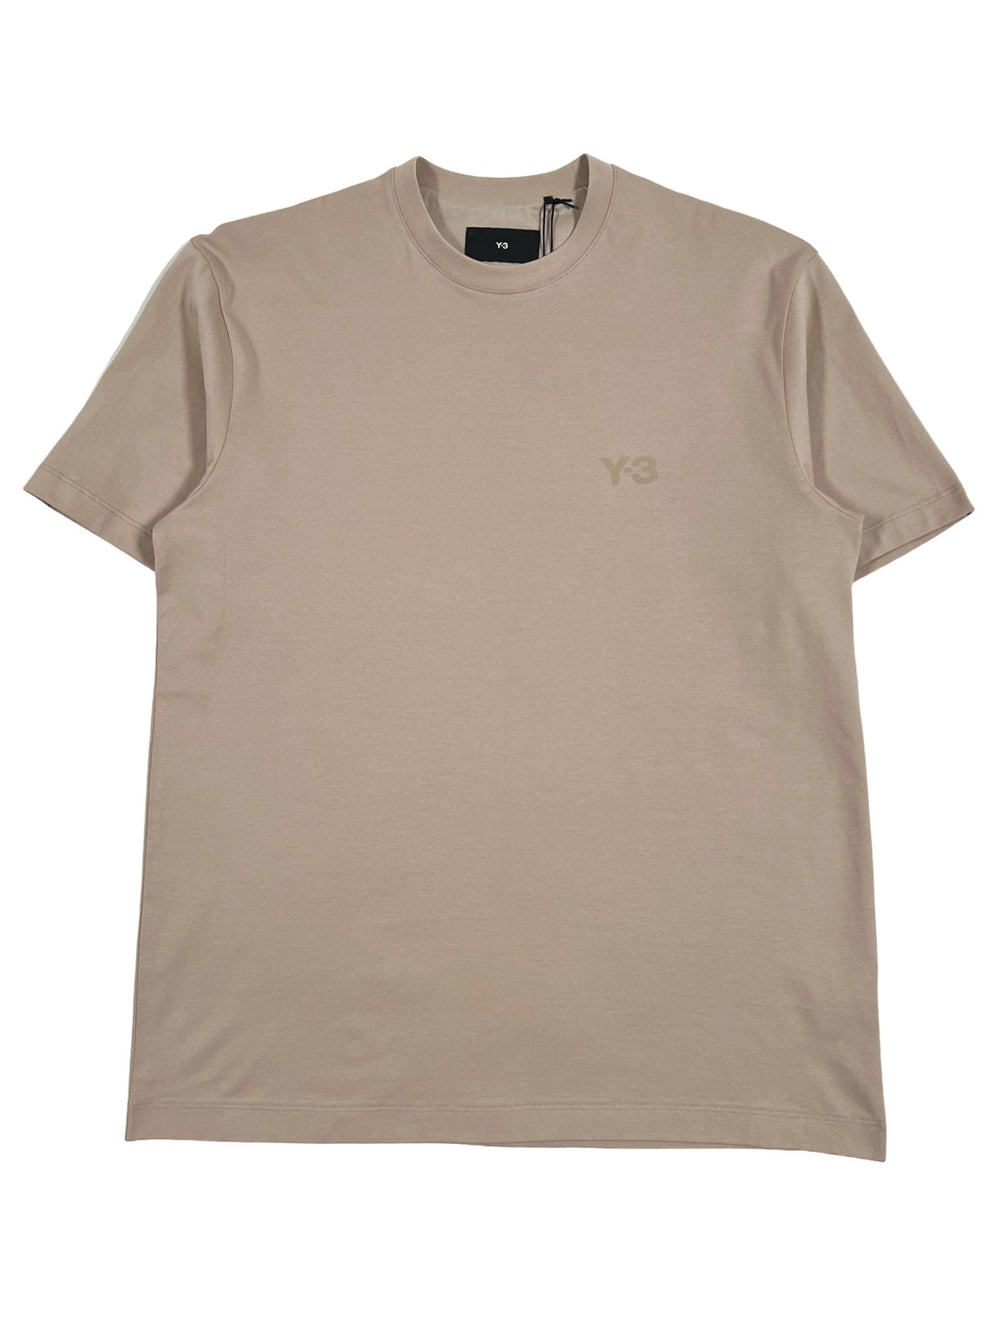 Probus Y-3 IV8223 RELAXED SS TEE CLABRO Y-3 IV8223 RELAXED SS TEE CLABRO BEIGE